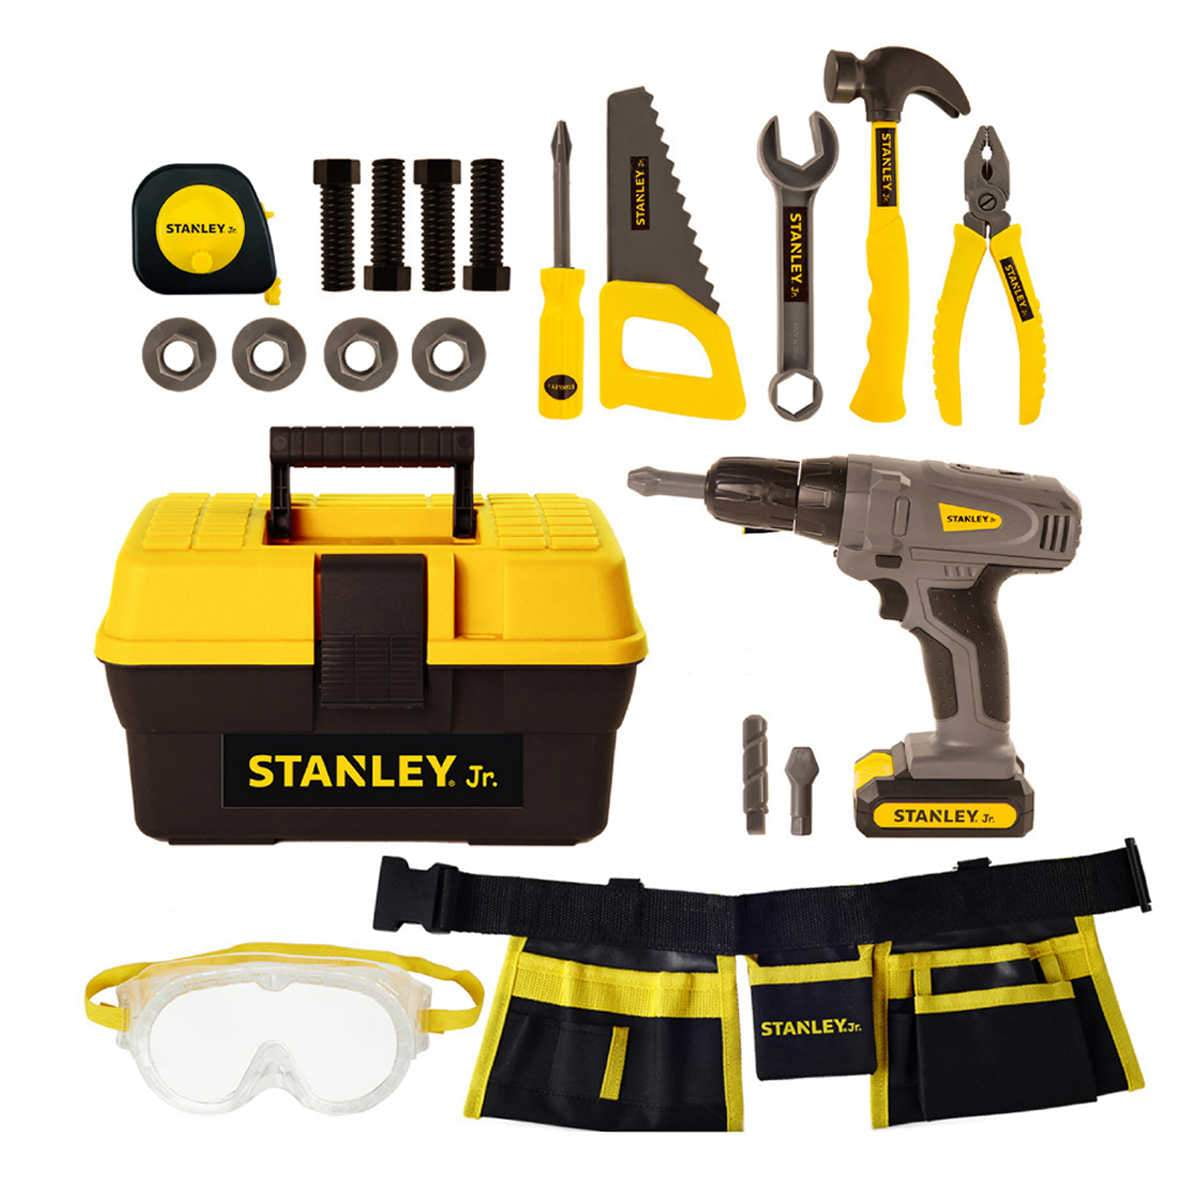 Stanley Jr Mega Tool 21 pcs Battery Operated Drill & Toolbox Set Toy New in Box 